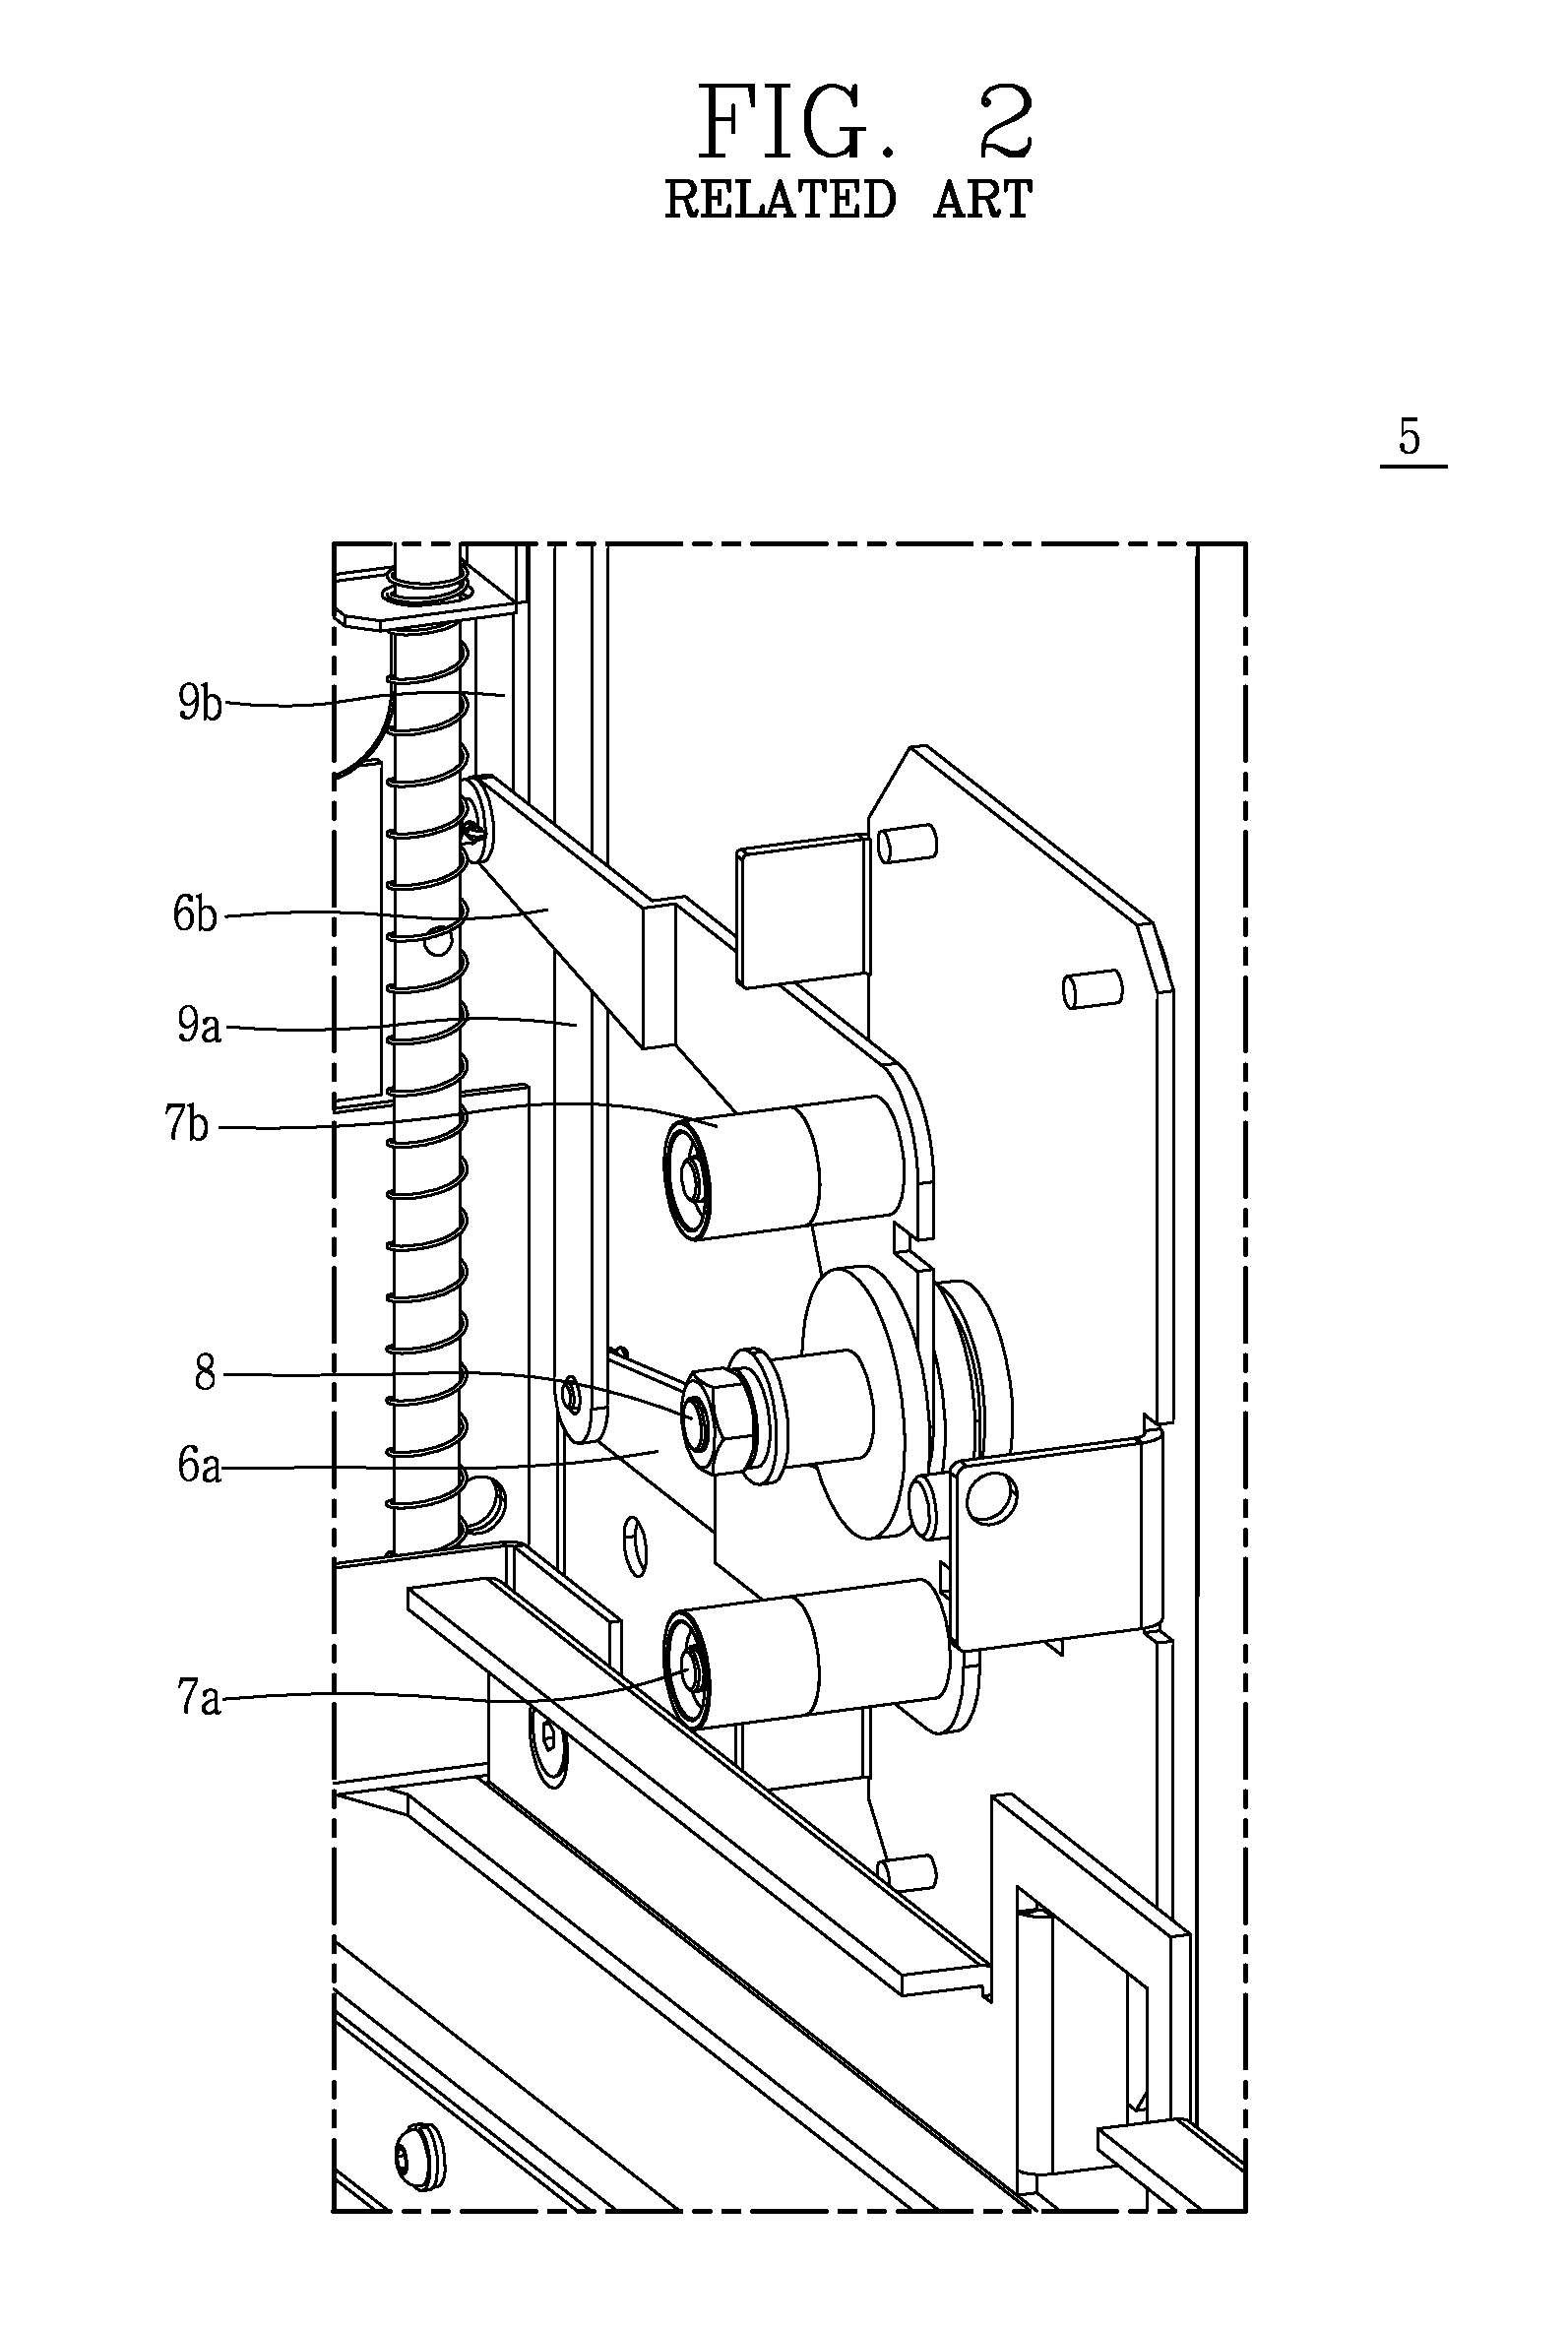 Circuit breaker having cradle with a shutter safety device